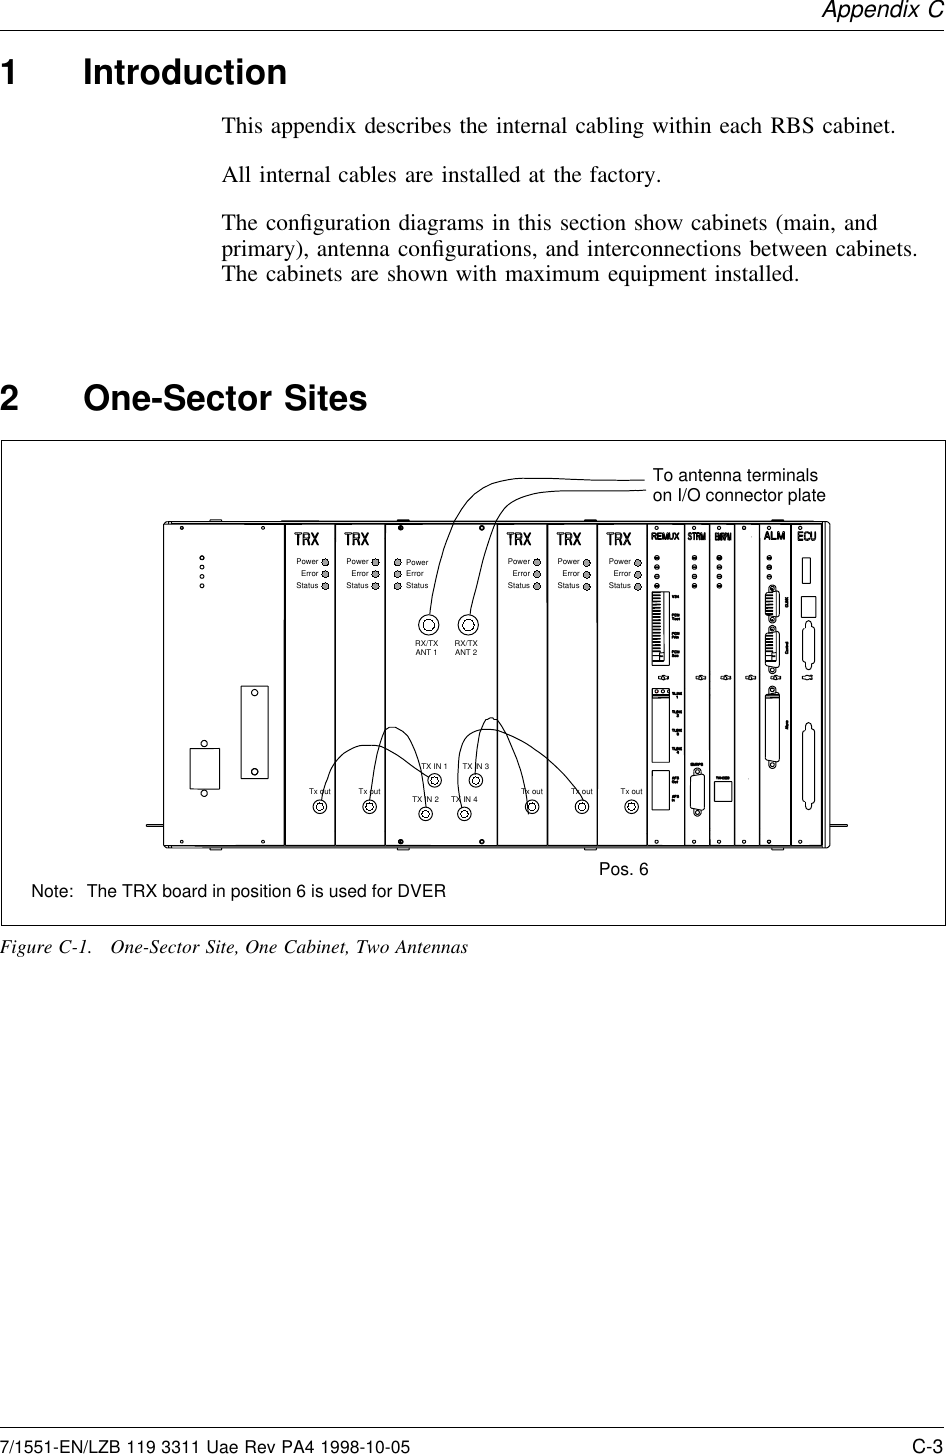 Appendix C1 IntroductionThis appendix describes the internal cabling within each RBS cabinet.All internal cables are installed at the factory.The conﬁguration diagrams in this section show cabinets (main, andprimary), antenna conﬁgurations, and interconnections between cabinets.The cabinets are shown with maximum equipment installed.2 One-Sector SitesPowerErrorStatusTX IN 1TX IN 2TX IN 3TX IN 4PowerErrorStatusPowerErrorStatusPowerErrorStatusPowerErrorStatusPowerErrorStatusTx out Tx out Tx out Tx out Tx outTo antenna terminalson I/O connector plate Note: The TRX board in position 6 is used for DVERPos. 6RX/TXANT 1 RX/TXANT 2Figure C-1. One-Sector Site, One Cabinet, Two Antennas7/1551-EN/LZB 119 3311 Uae Rev PA4 1998-10-05 C-3